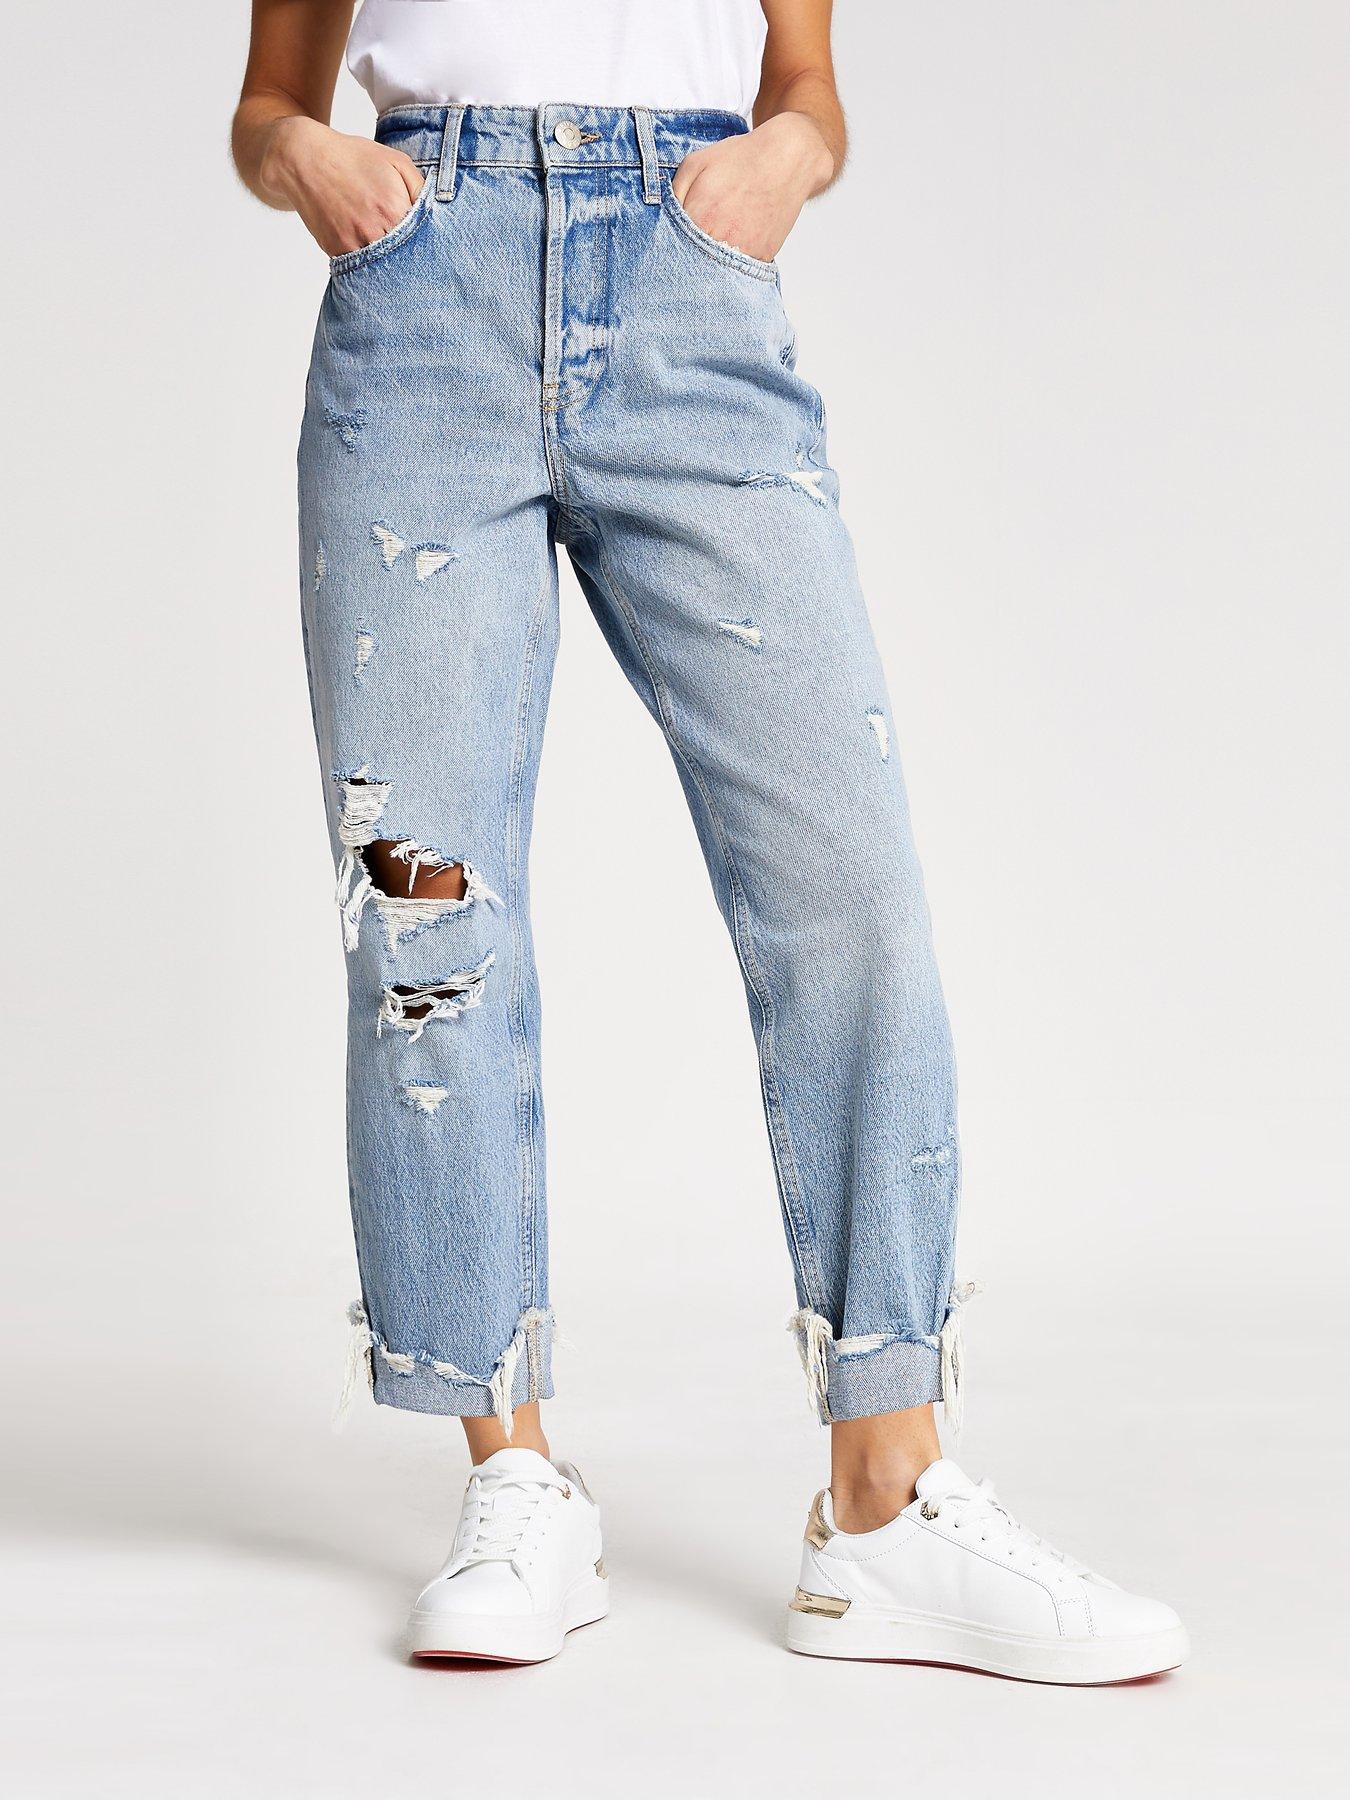 ripped mom jeans uk